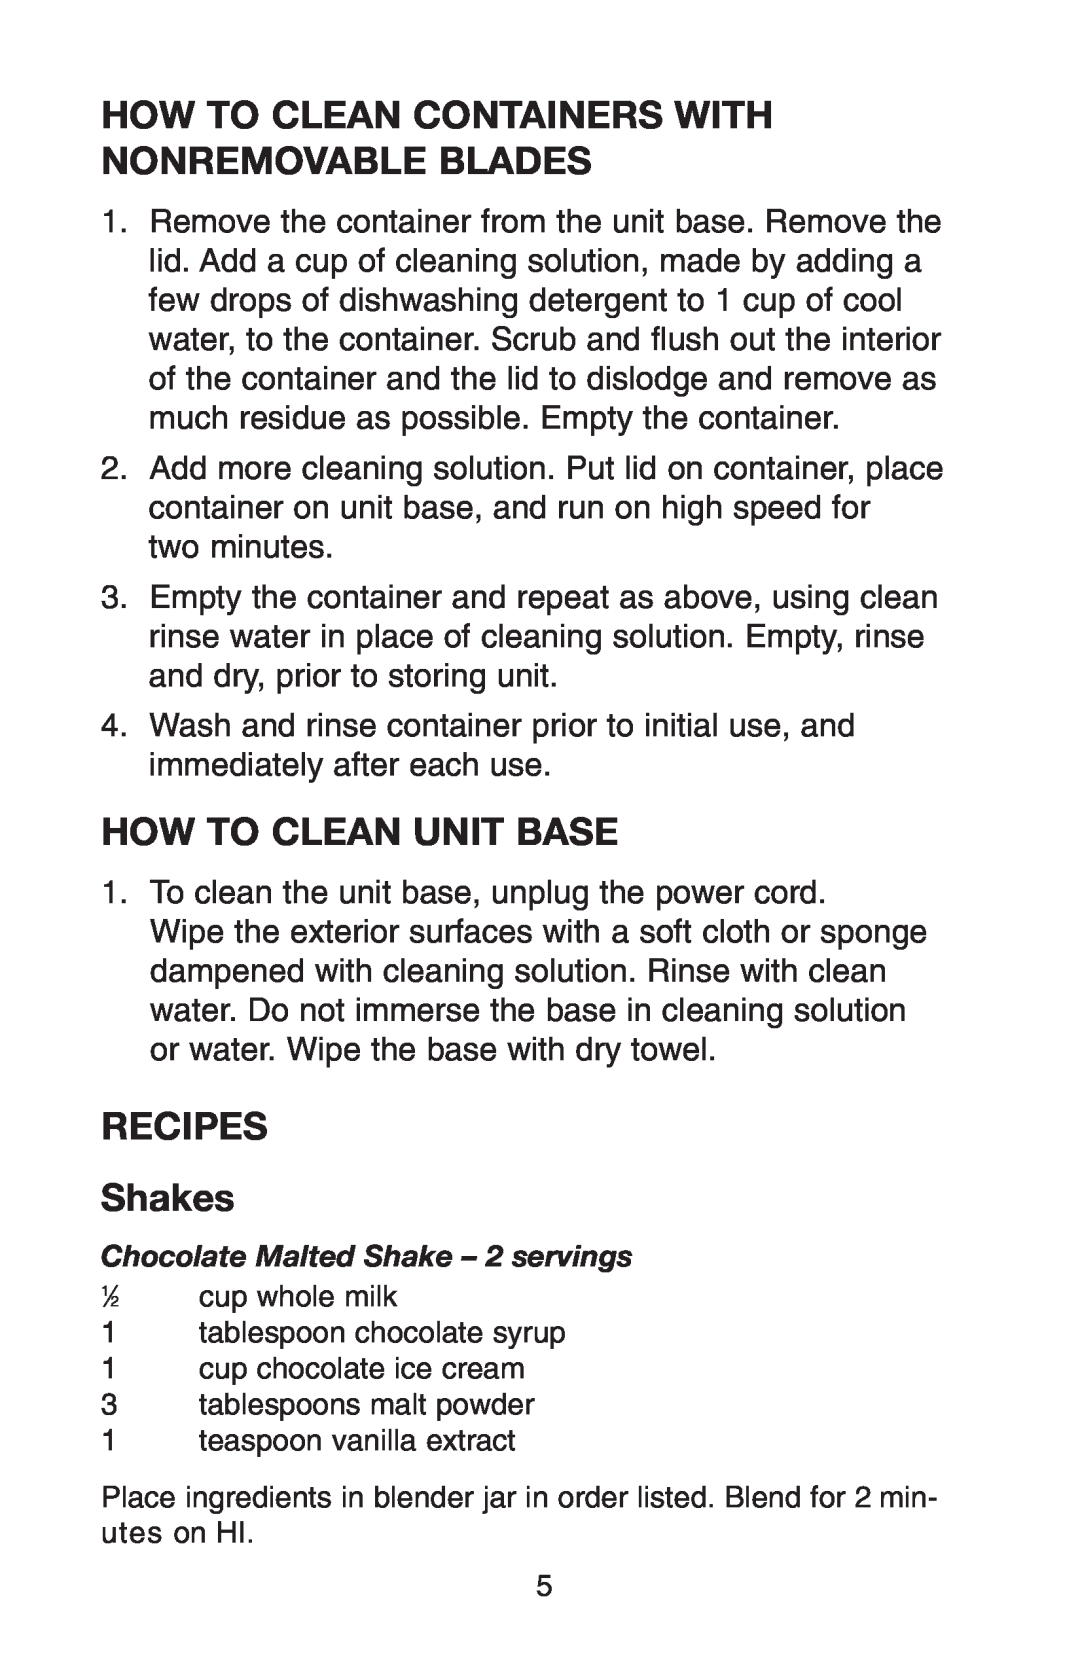 Conair RB70 manual How To Clean Containers With Nonremovable Blades, How To Clean Unit Base, RECIPES Shakes 